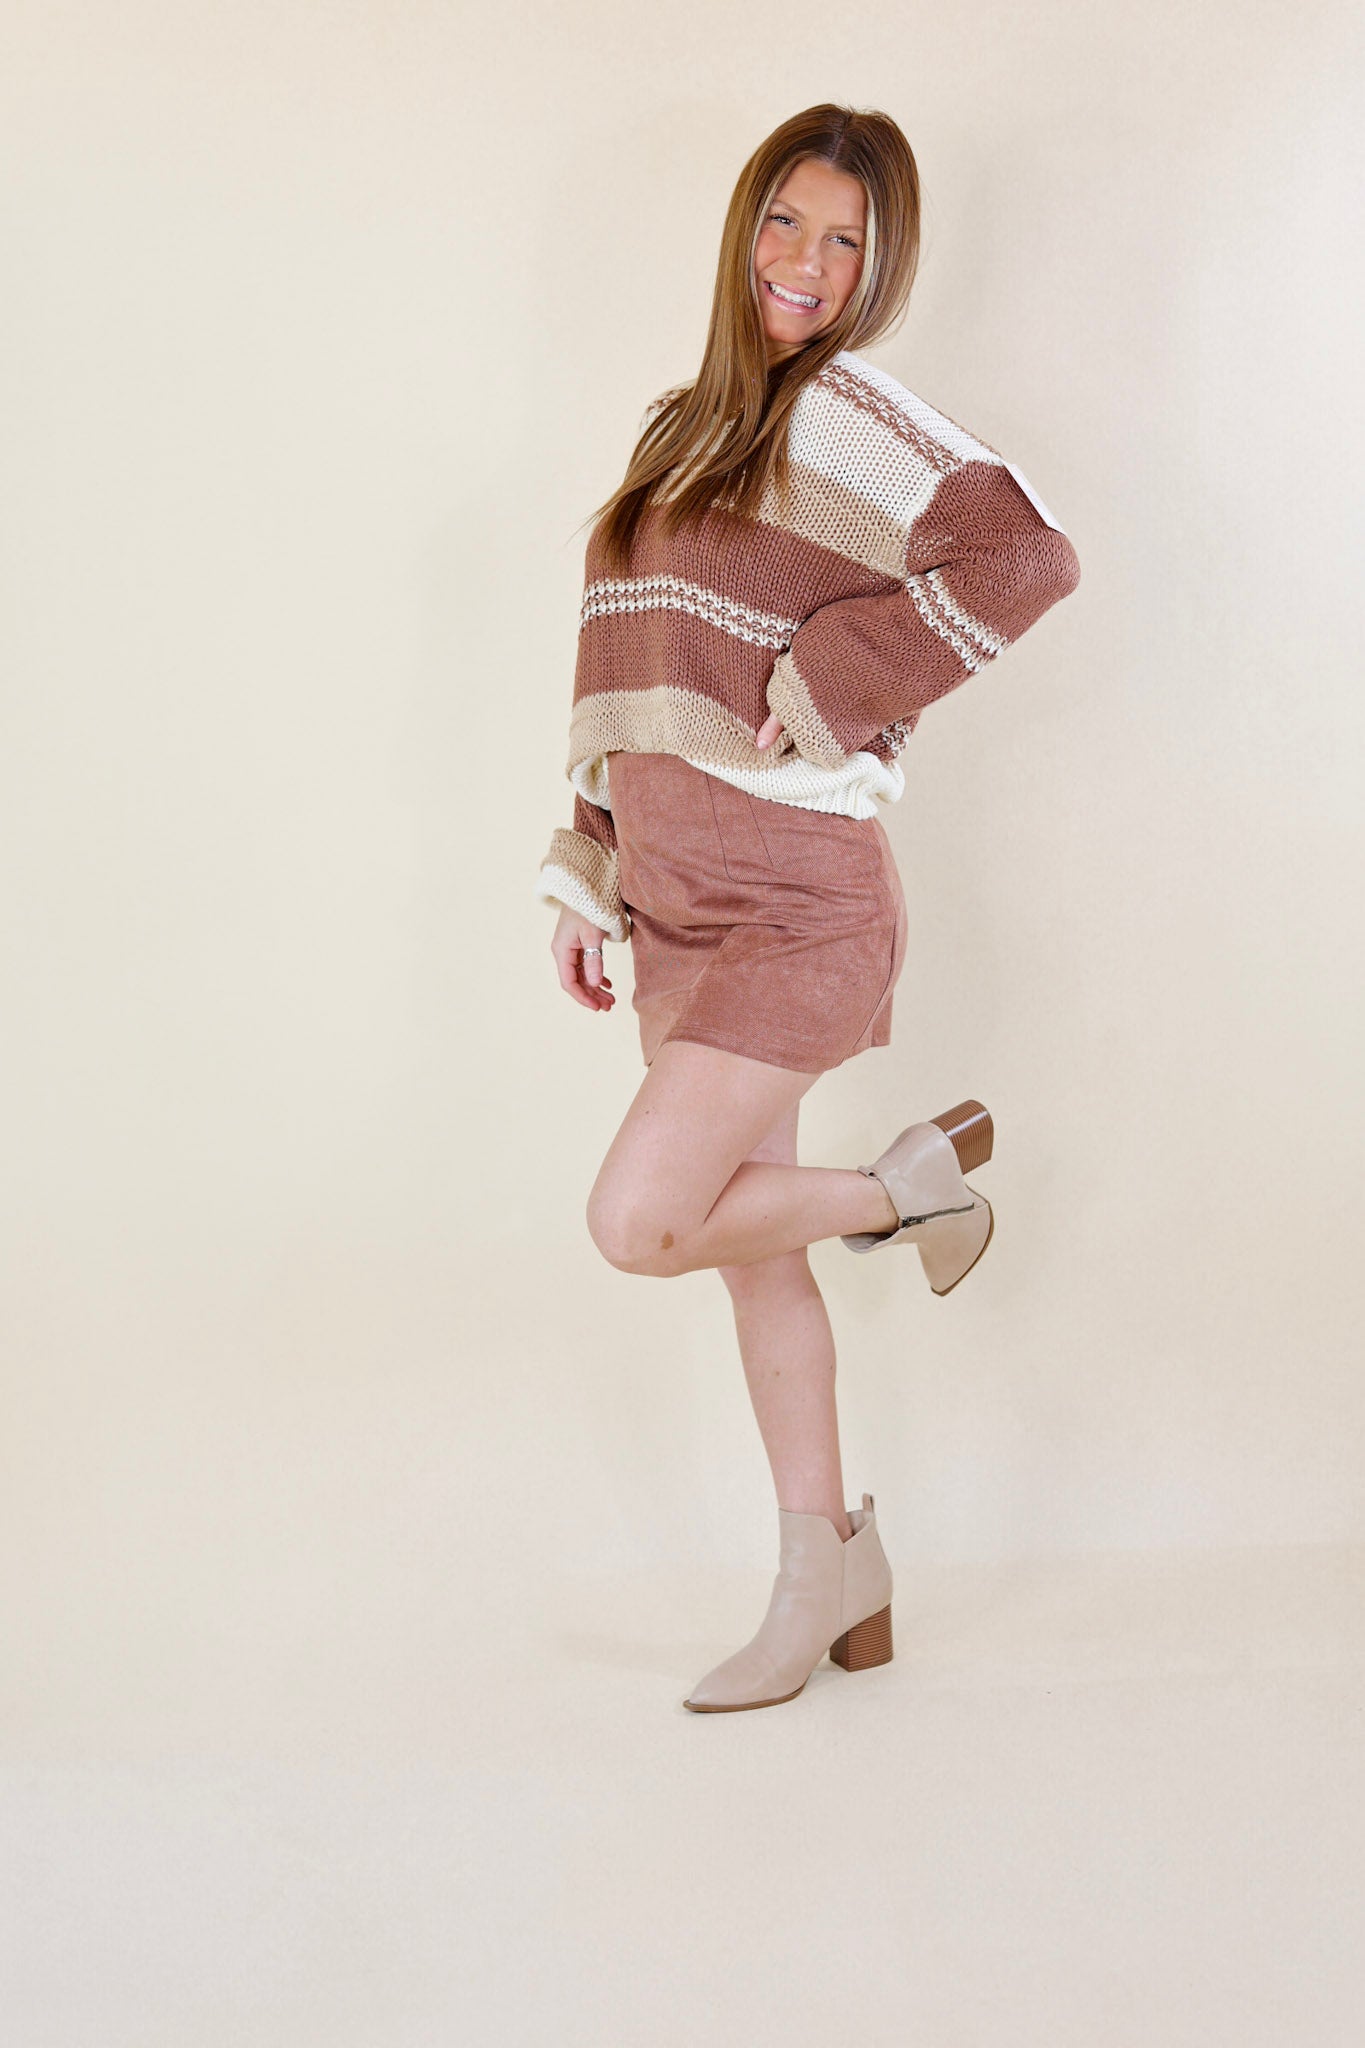 Cozy On Up Long Sleeve Striped Sweater in Brown Mix - Giddy Up Glamour Boutique